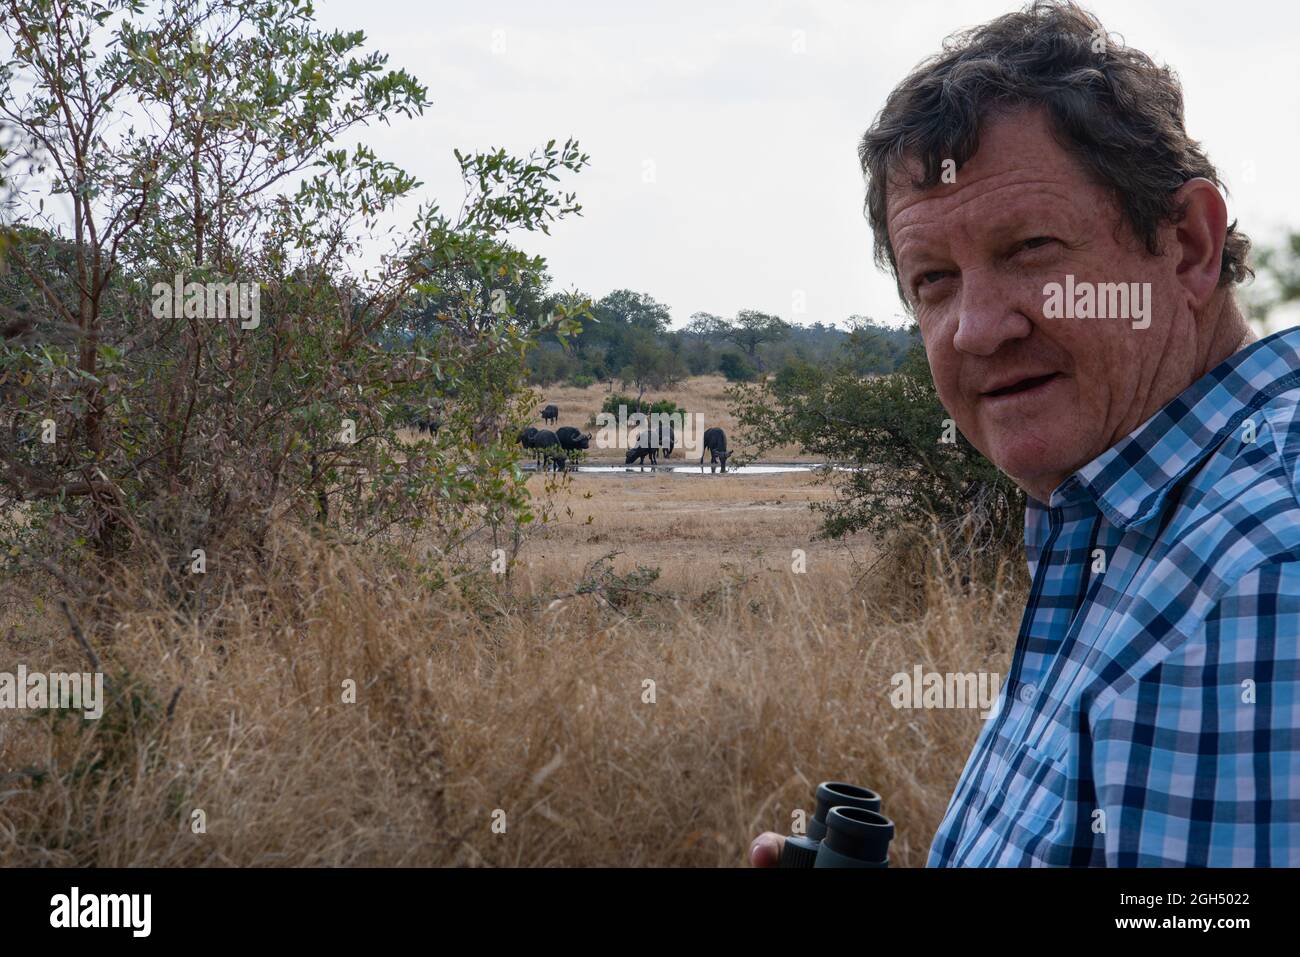 A man at a picnic site in the Kruger National Park watching a herd of buffalo drinking from a wateringhole Stock Photo